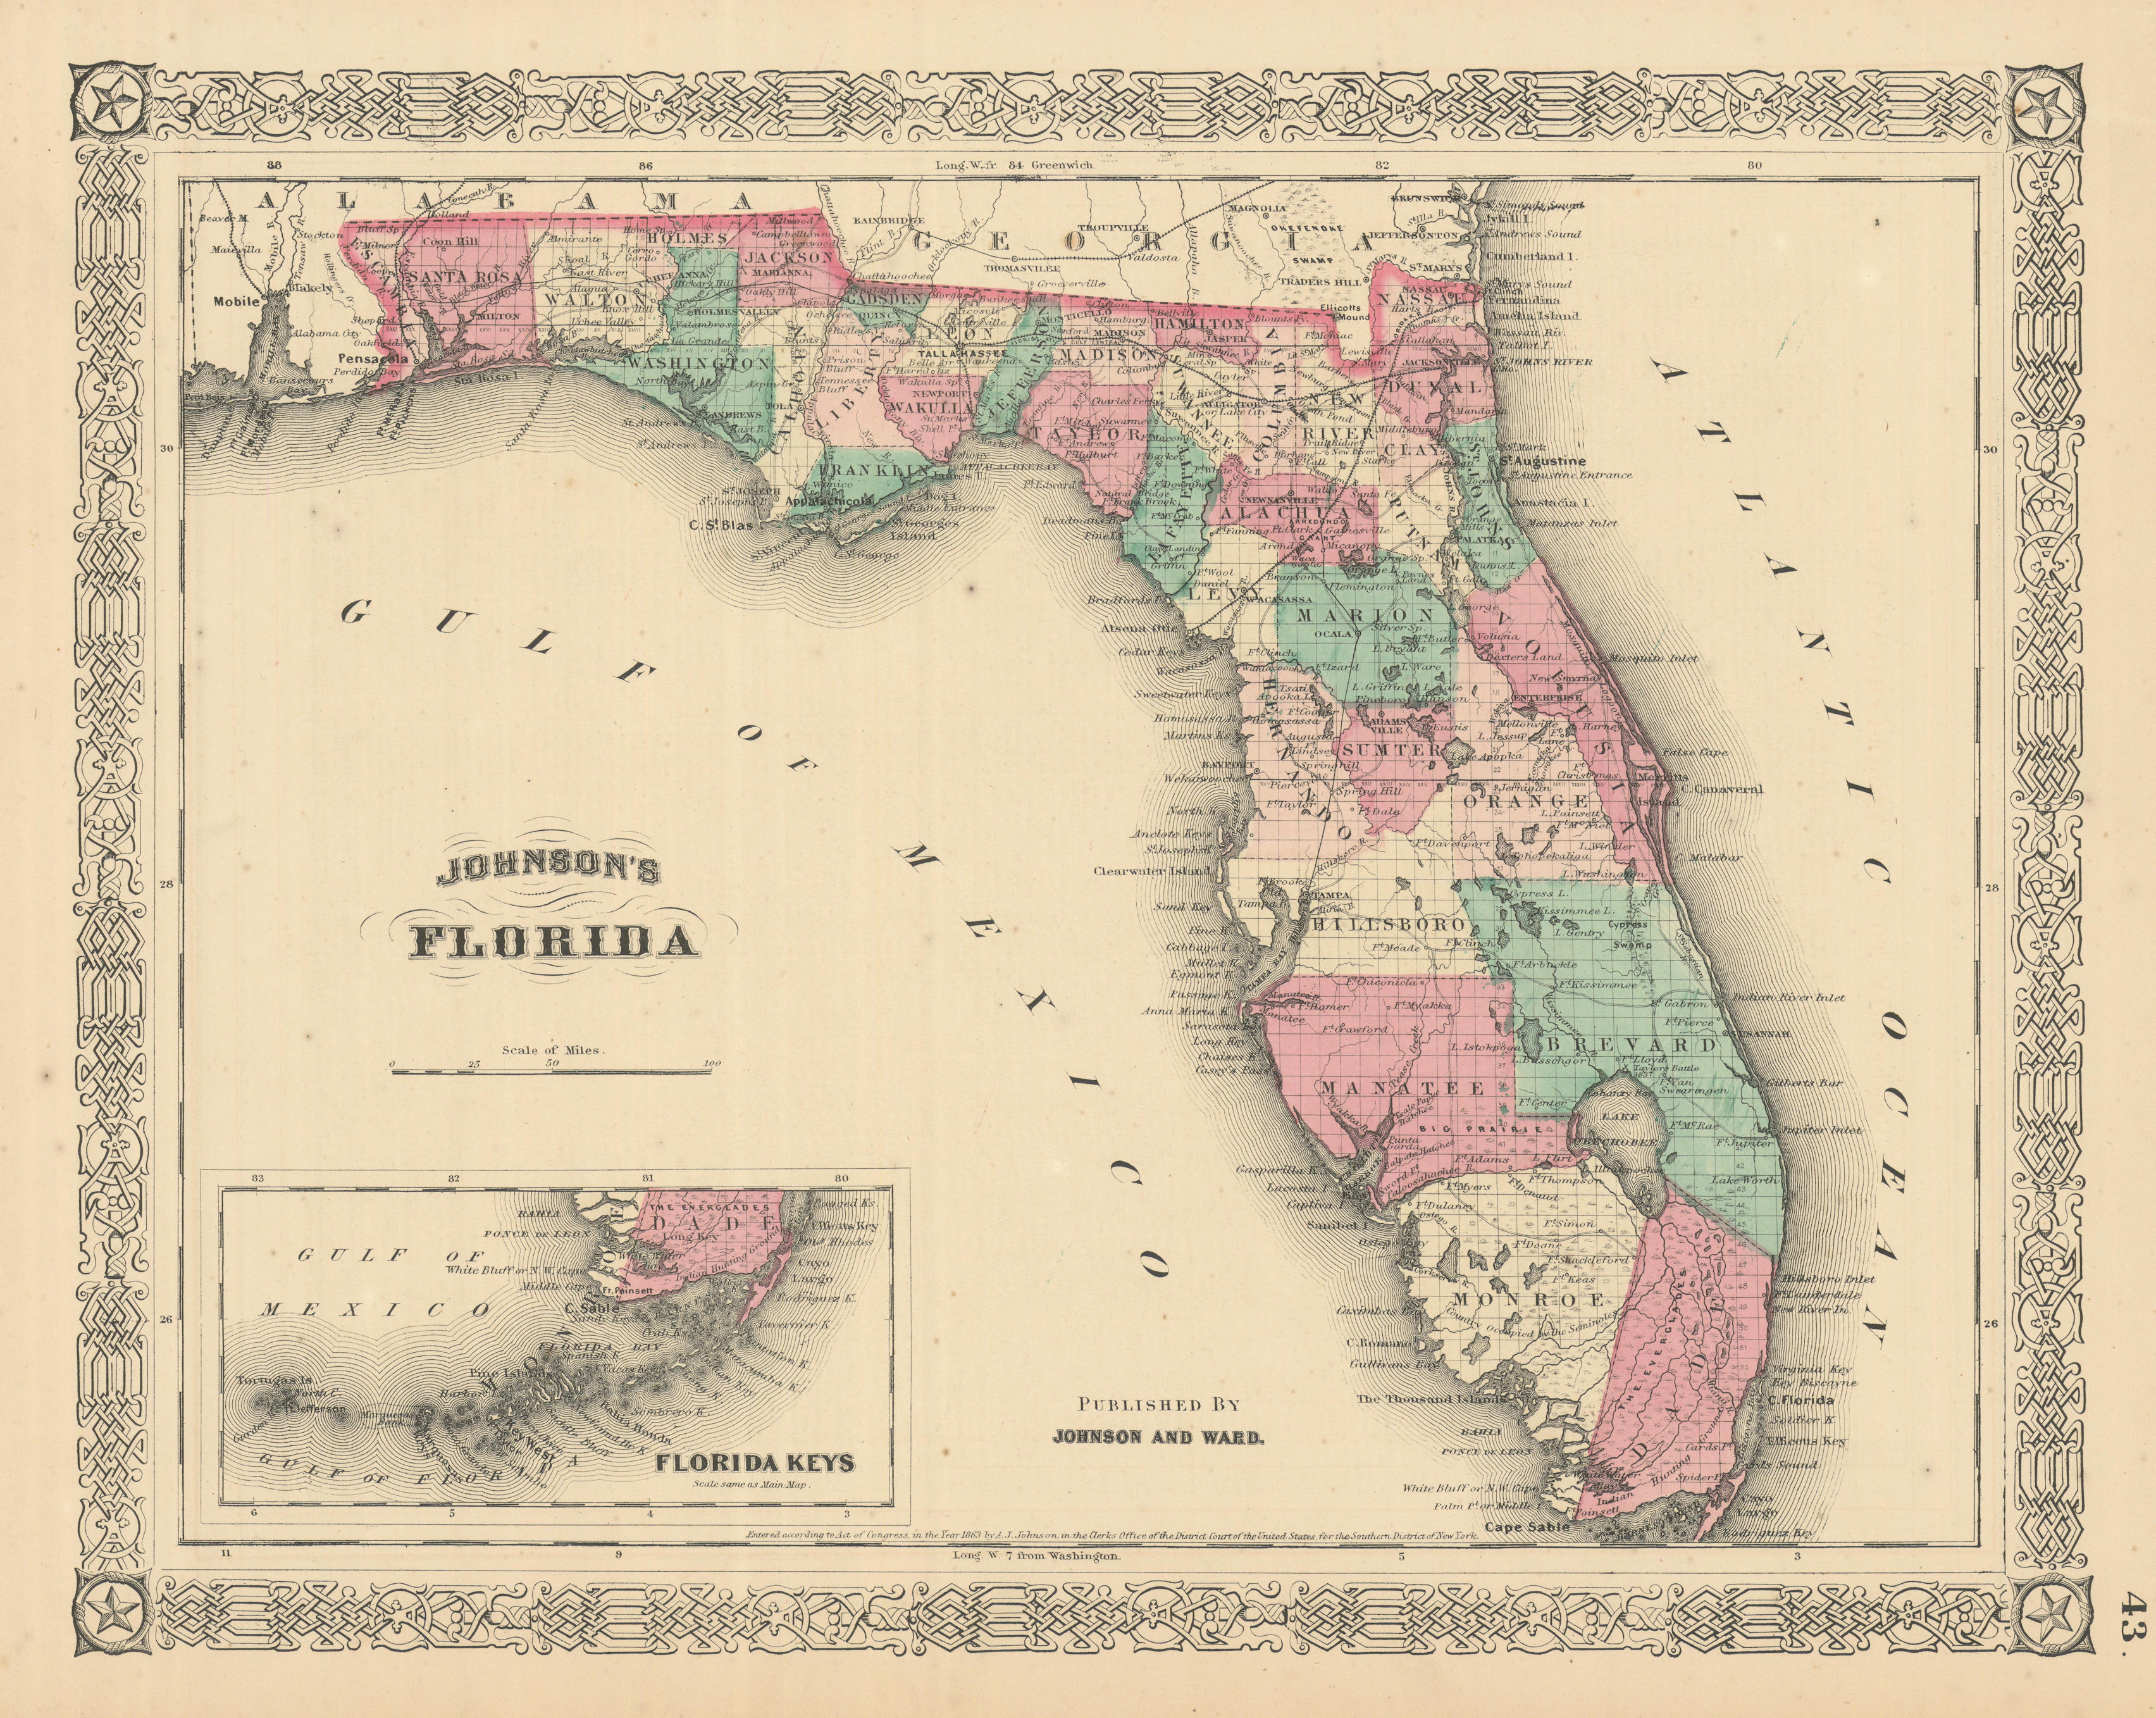 Associate Product Johnson's Florida. Florida Keys. US state map showing counties 1866 old